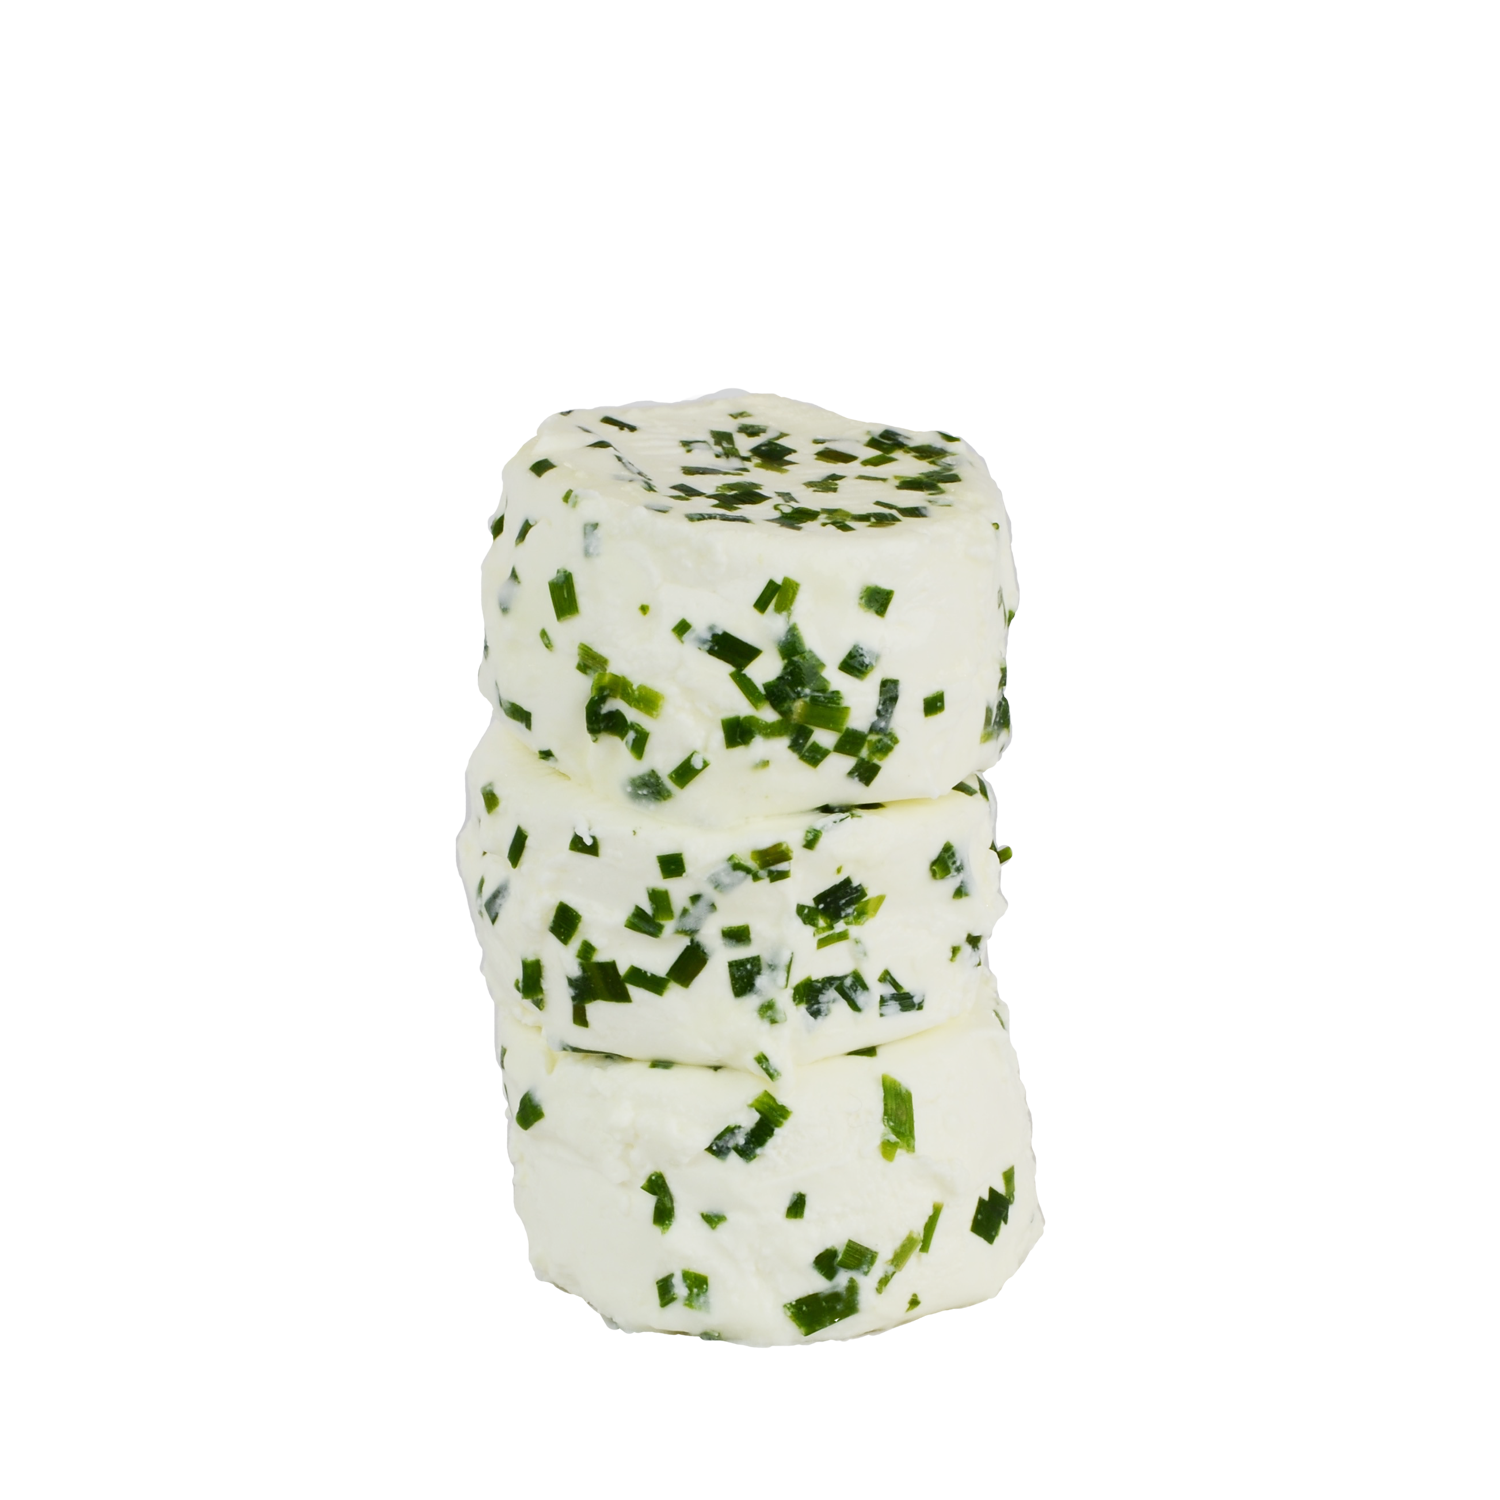 Spring Chive Chèvre Cheese